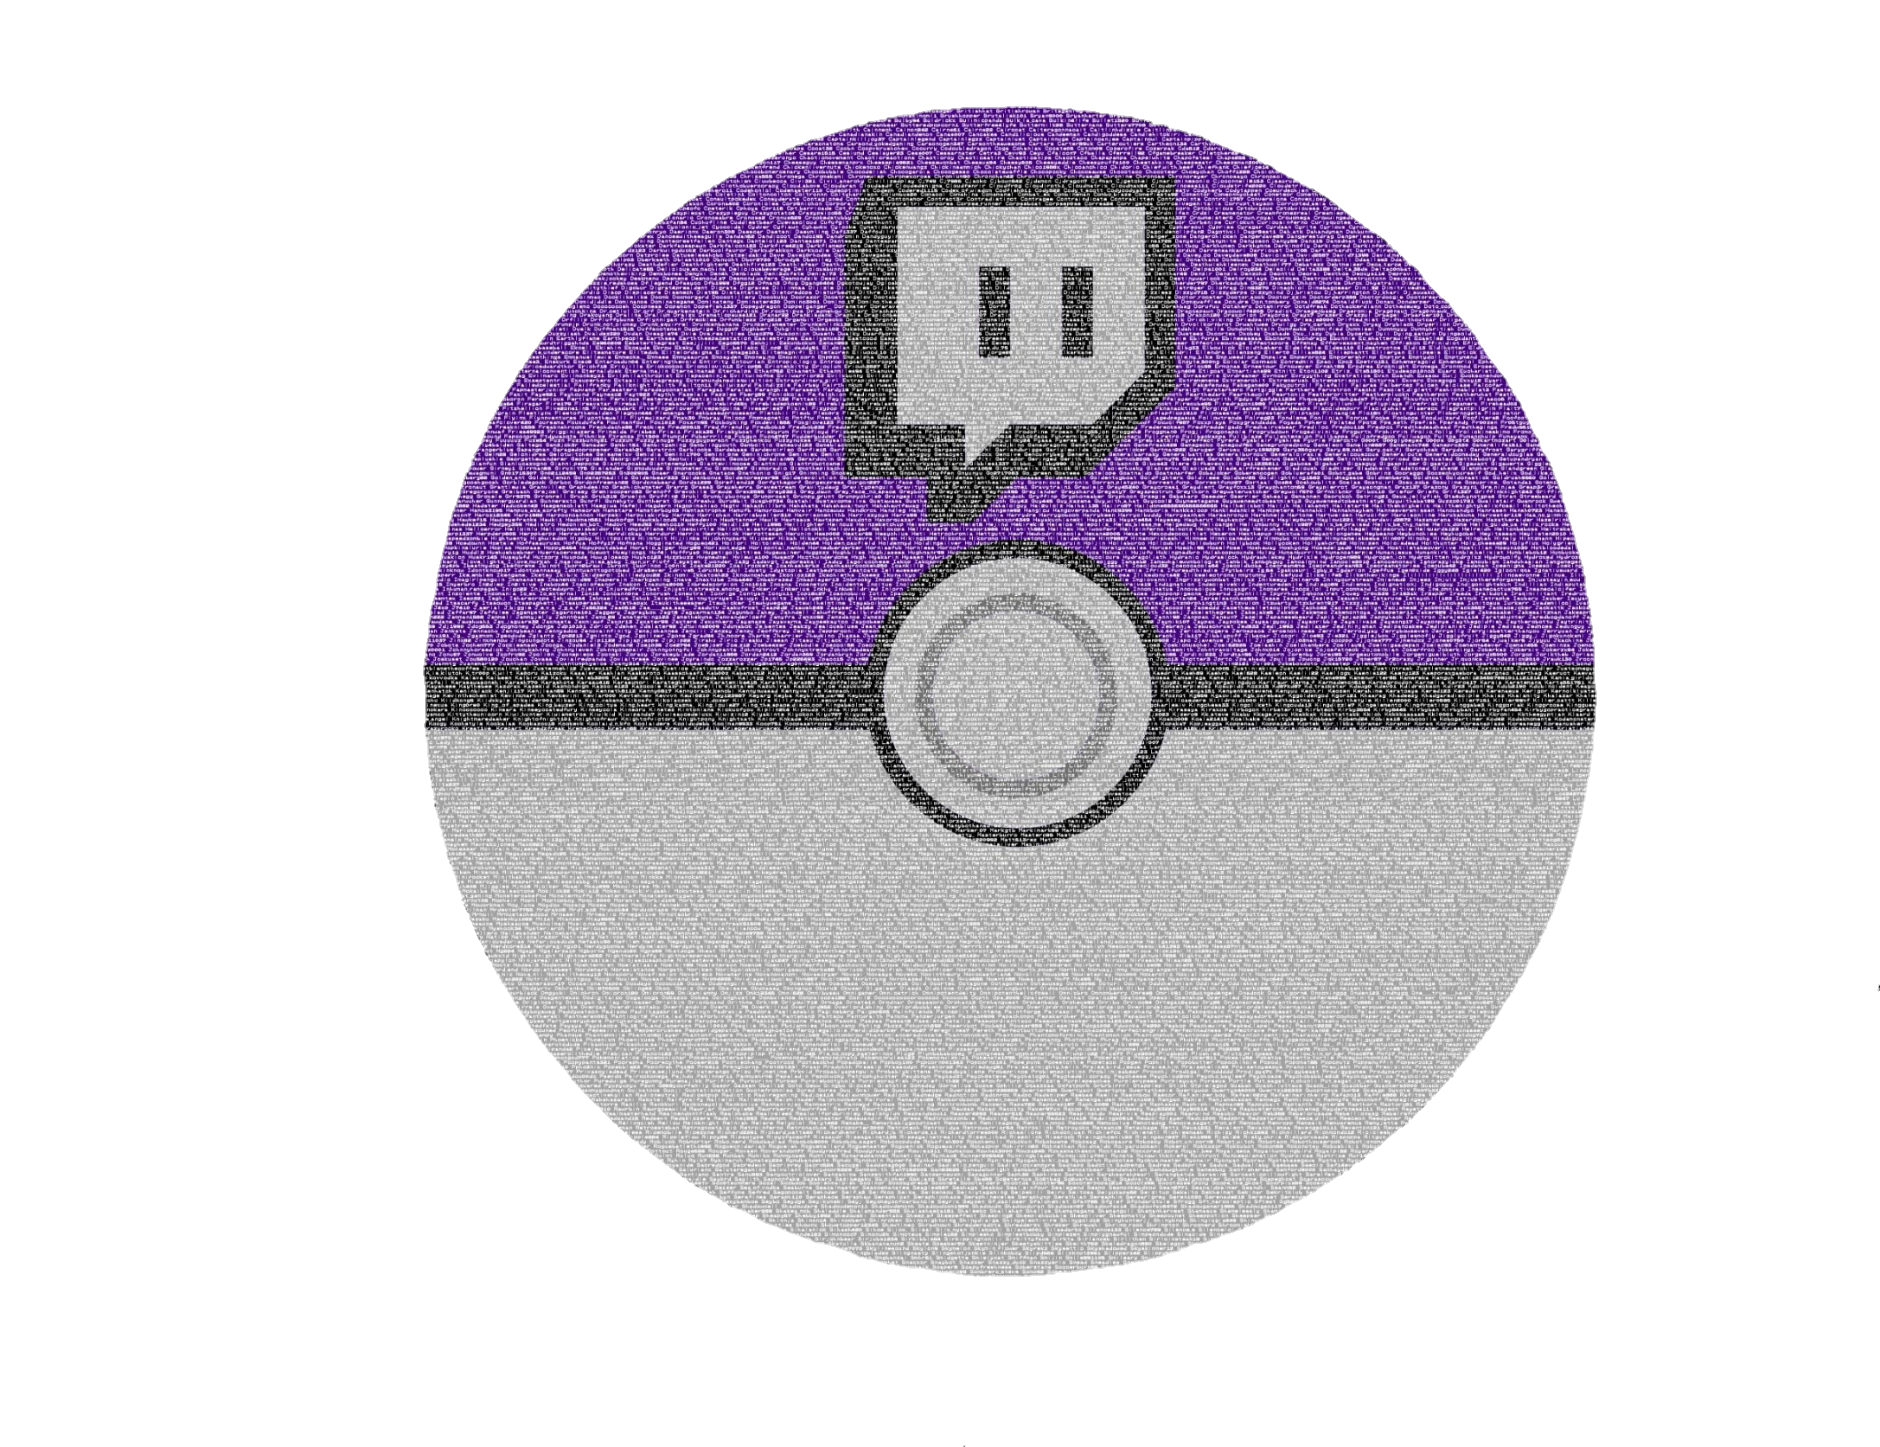 twitch-logo-png-from-pngfre-4